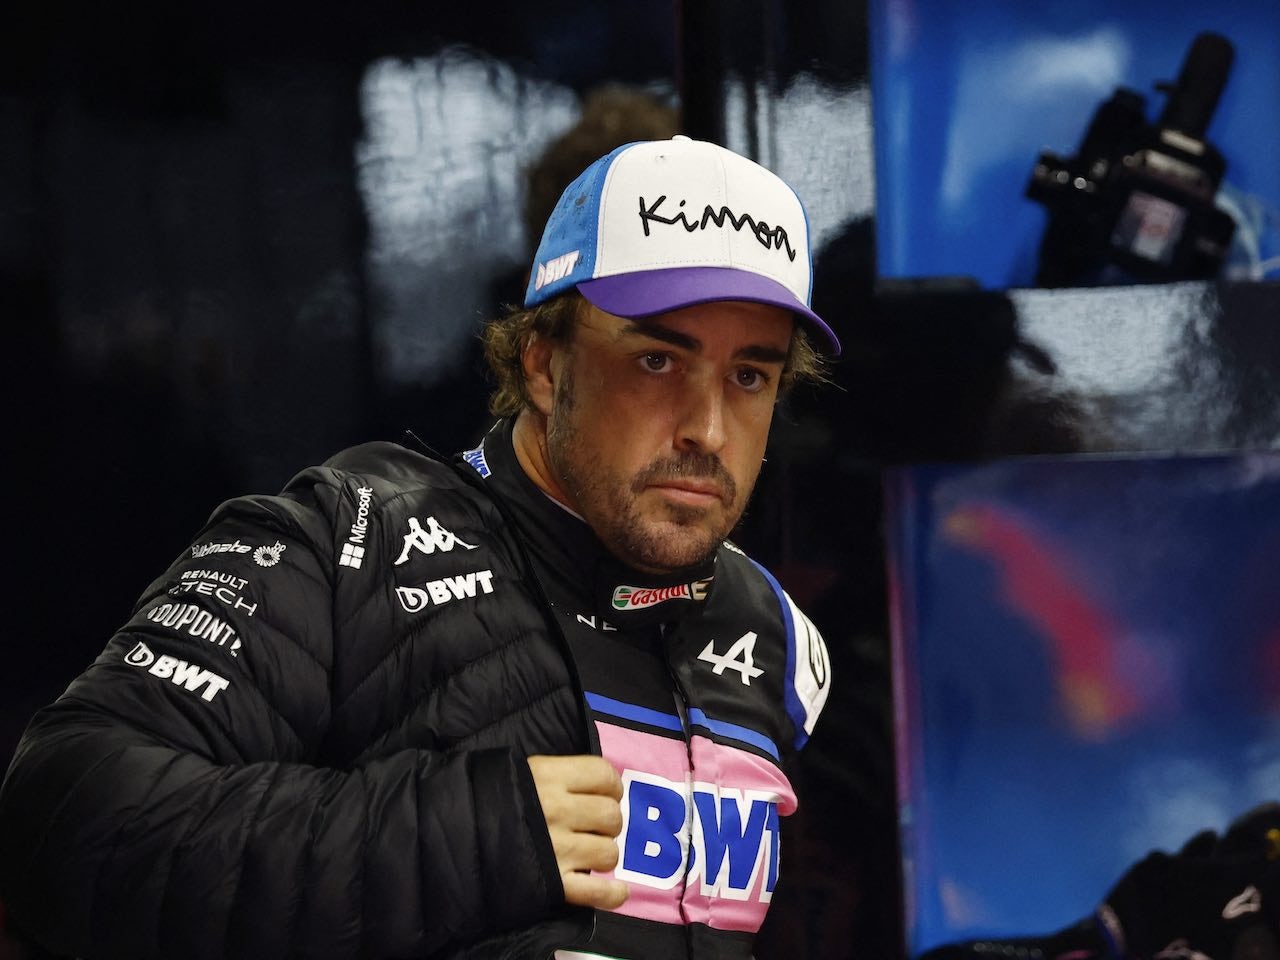 Stroll a potential F1 champion - Alonso